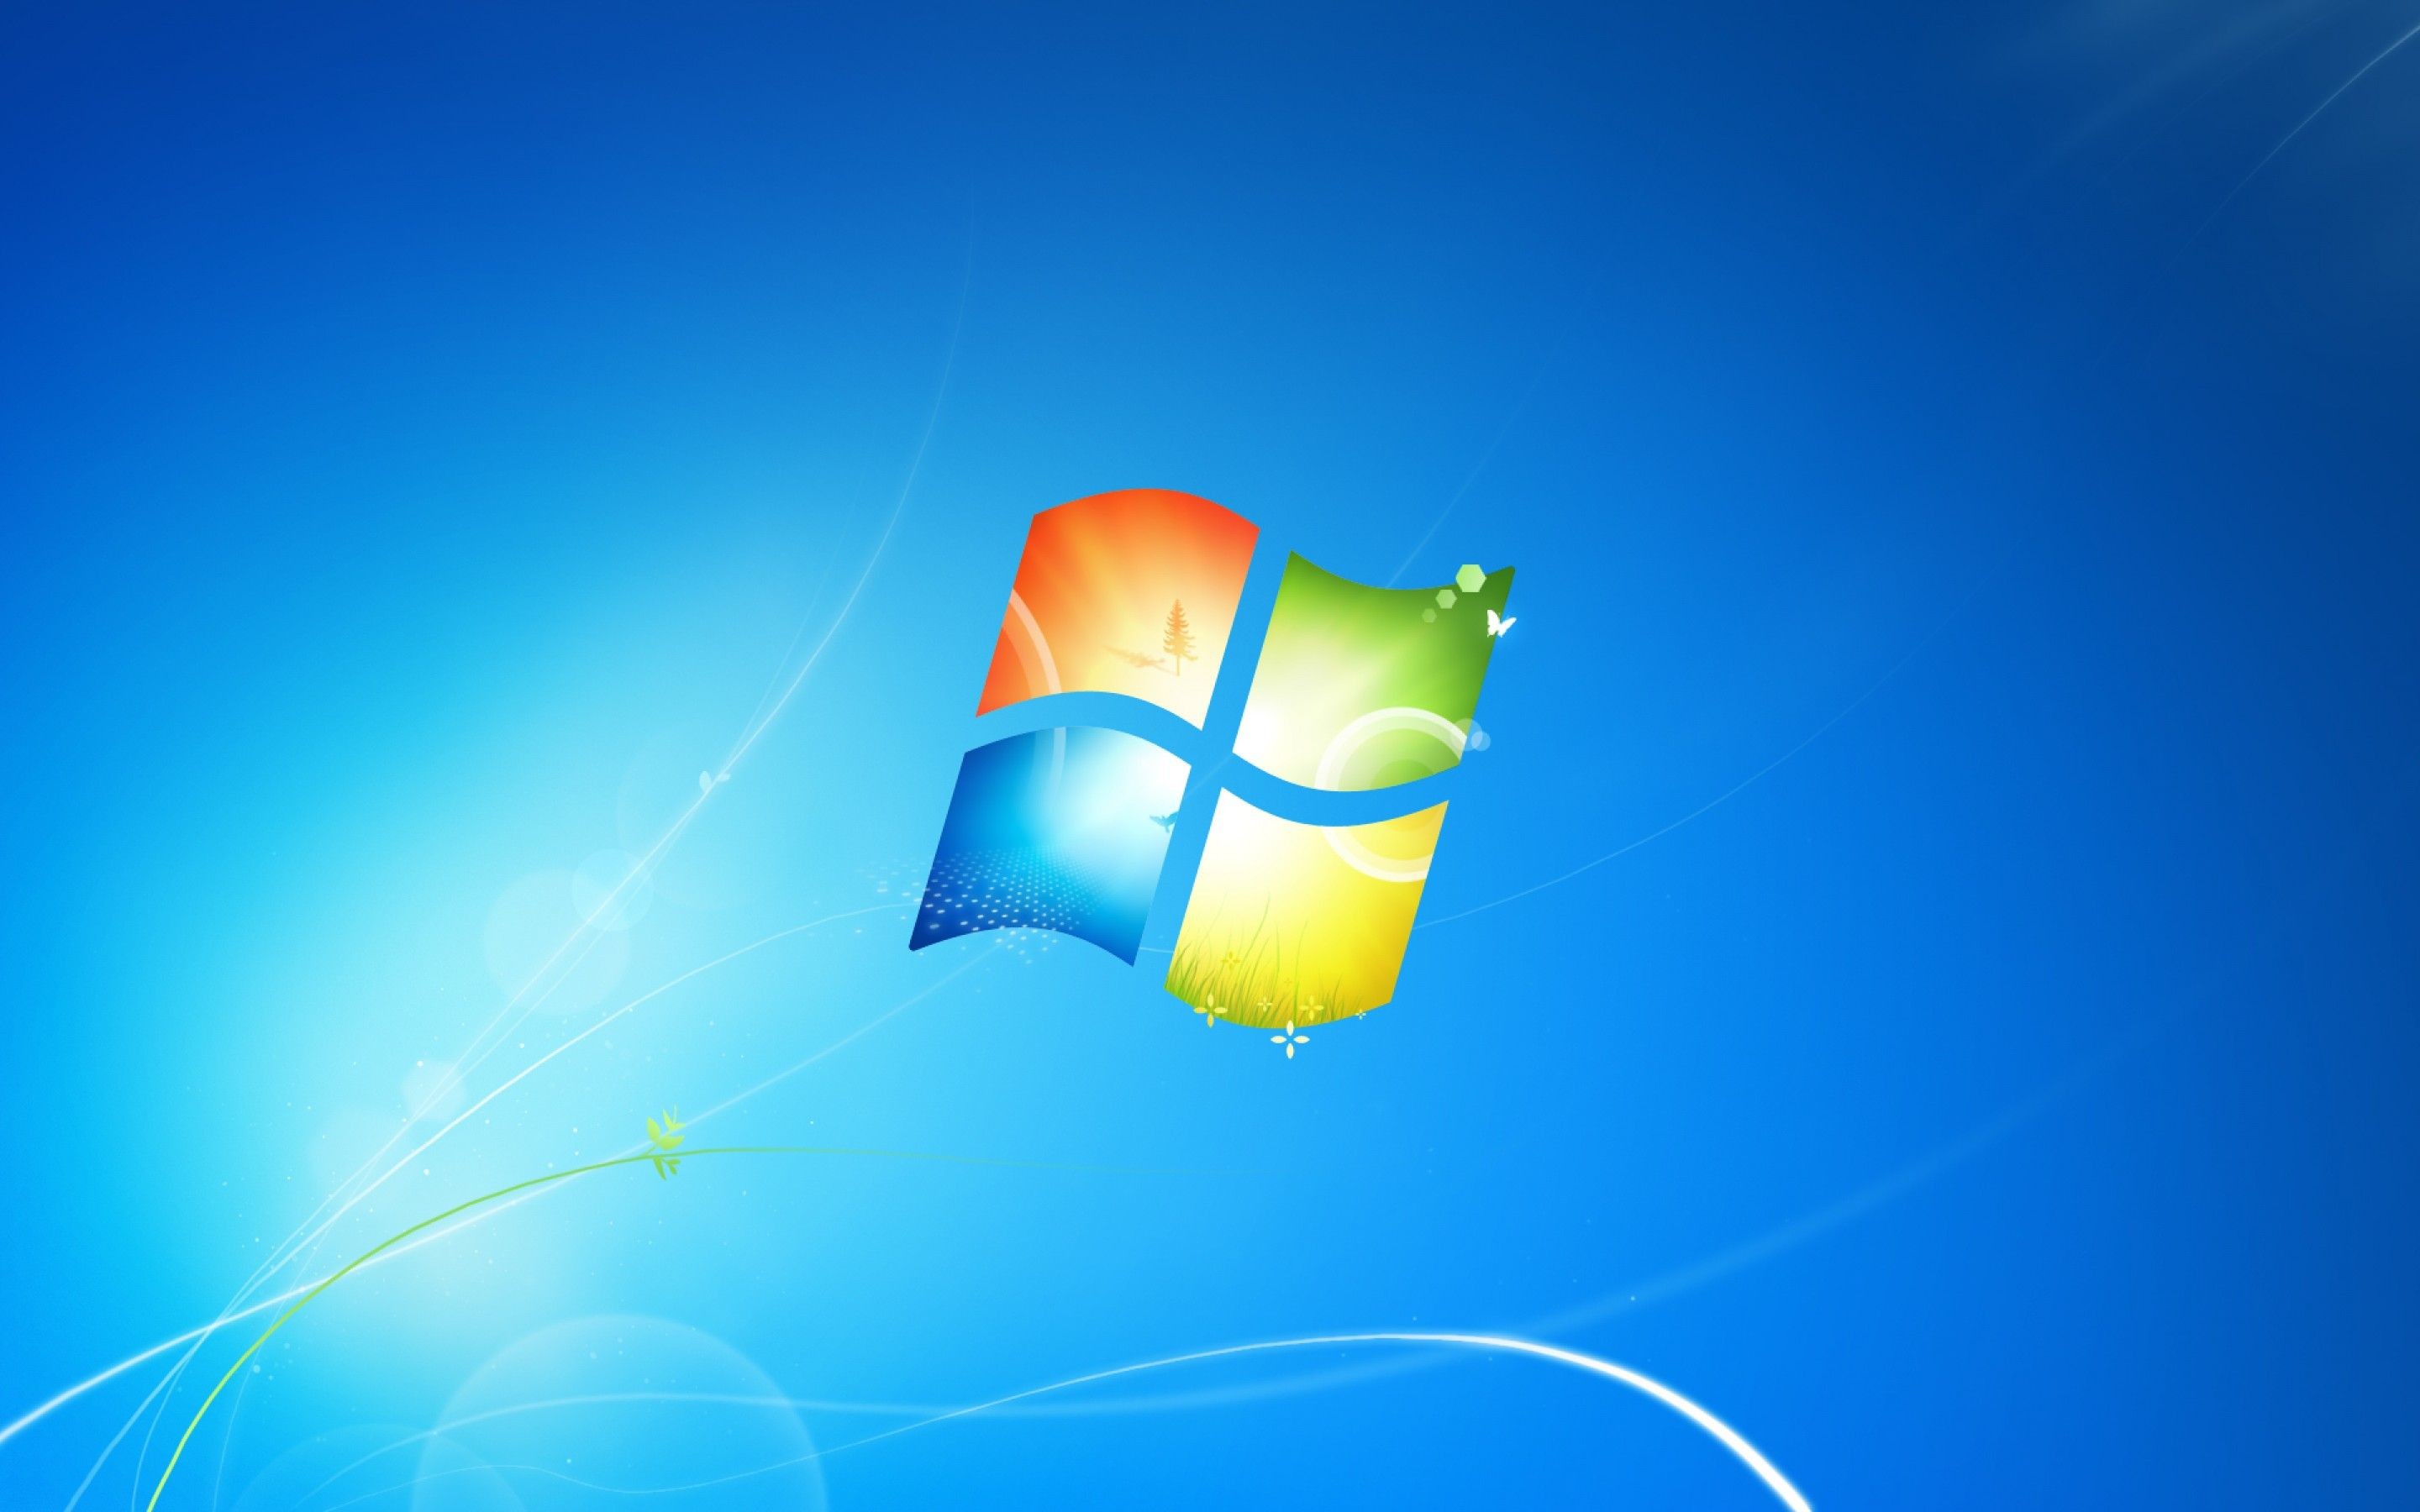 Wallpaper for windows 7 download